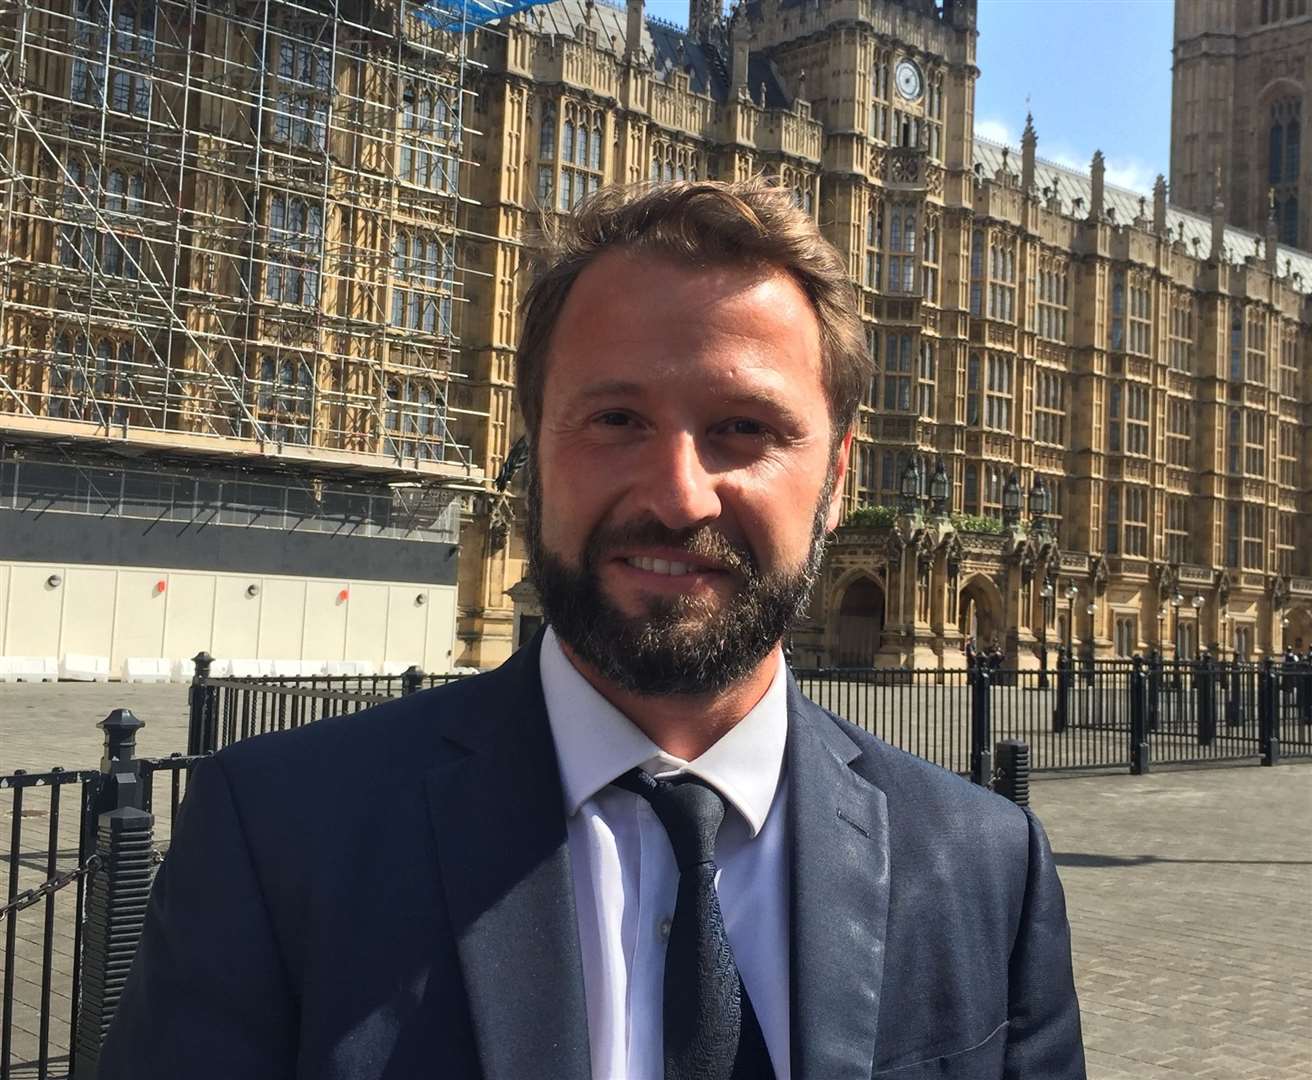 Owen Prew was expected to run as the Brexit candidate for Canterbury and Whitstable